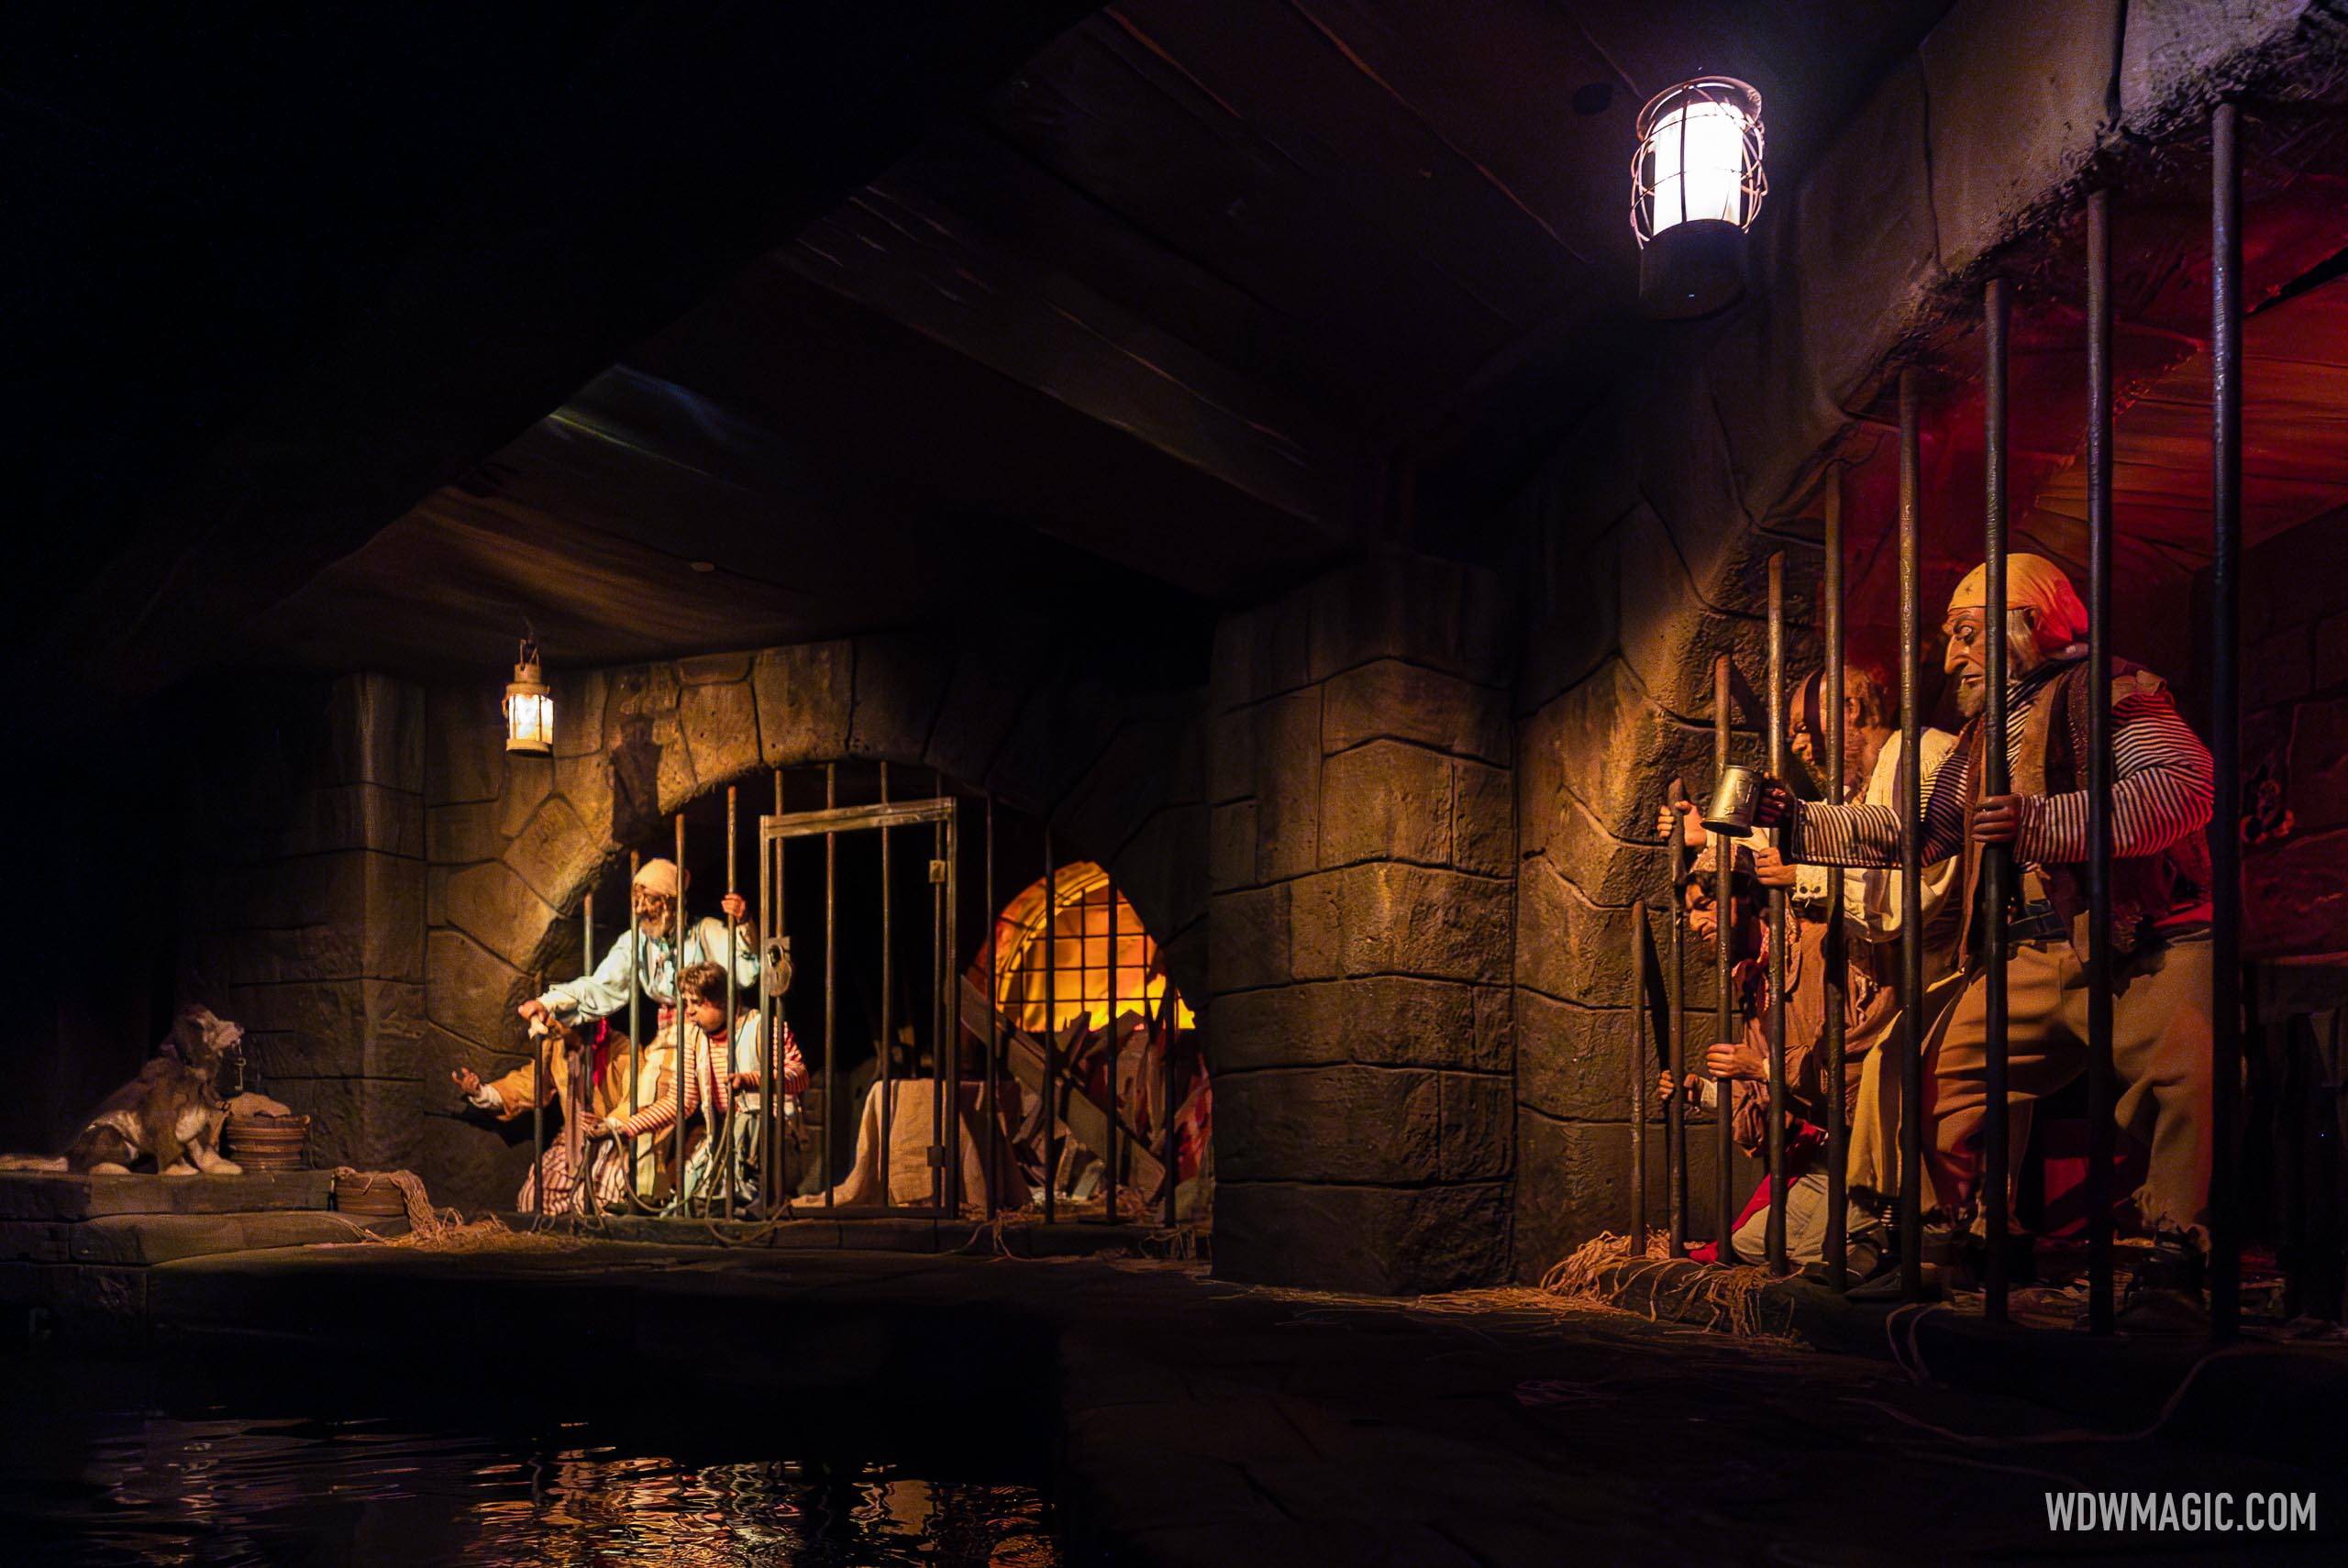 Press Release - More Pirates of the Caribbean update information